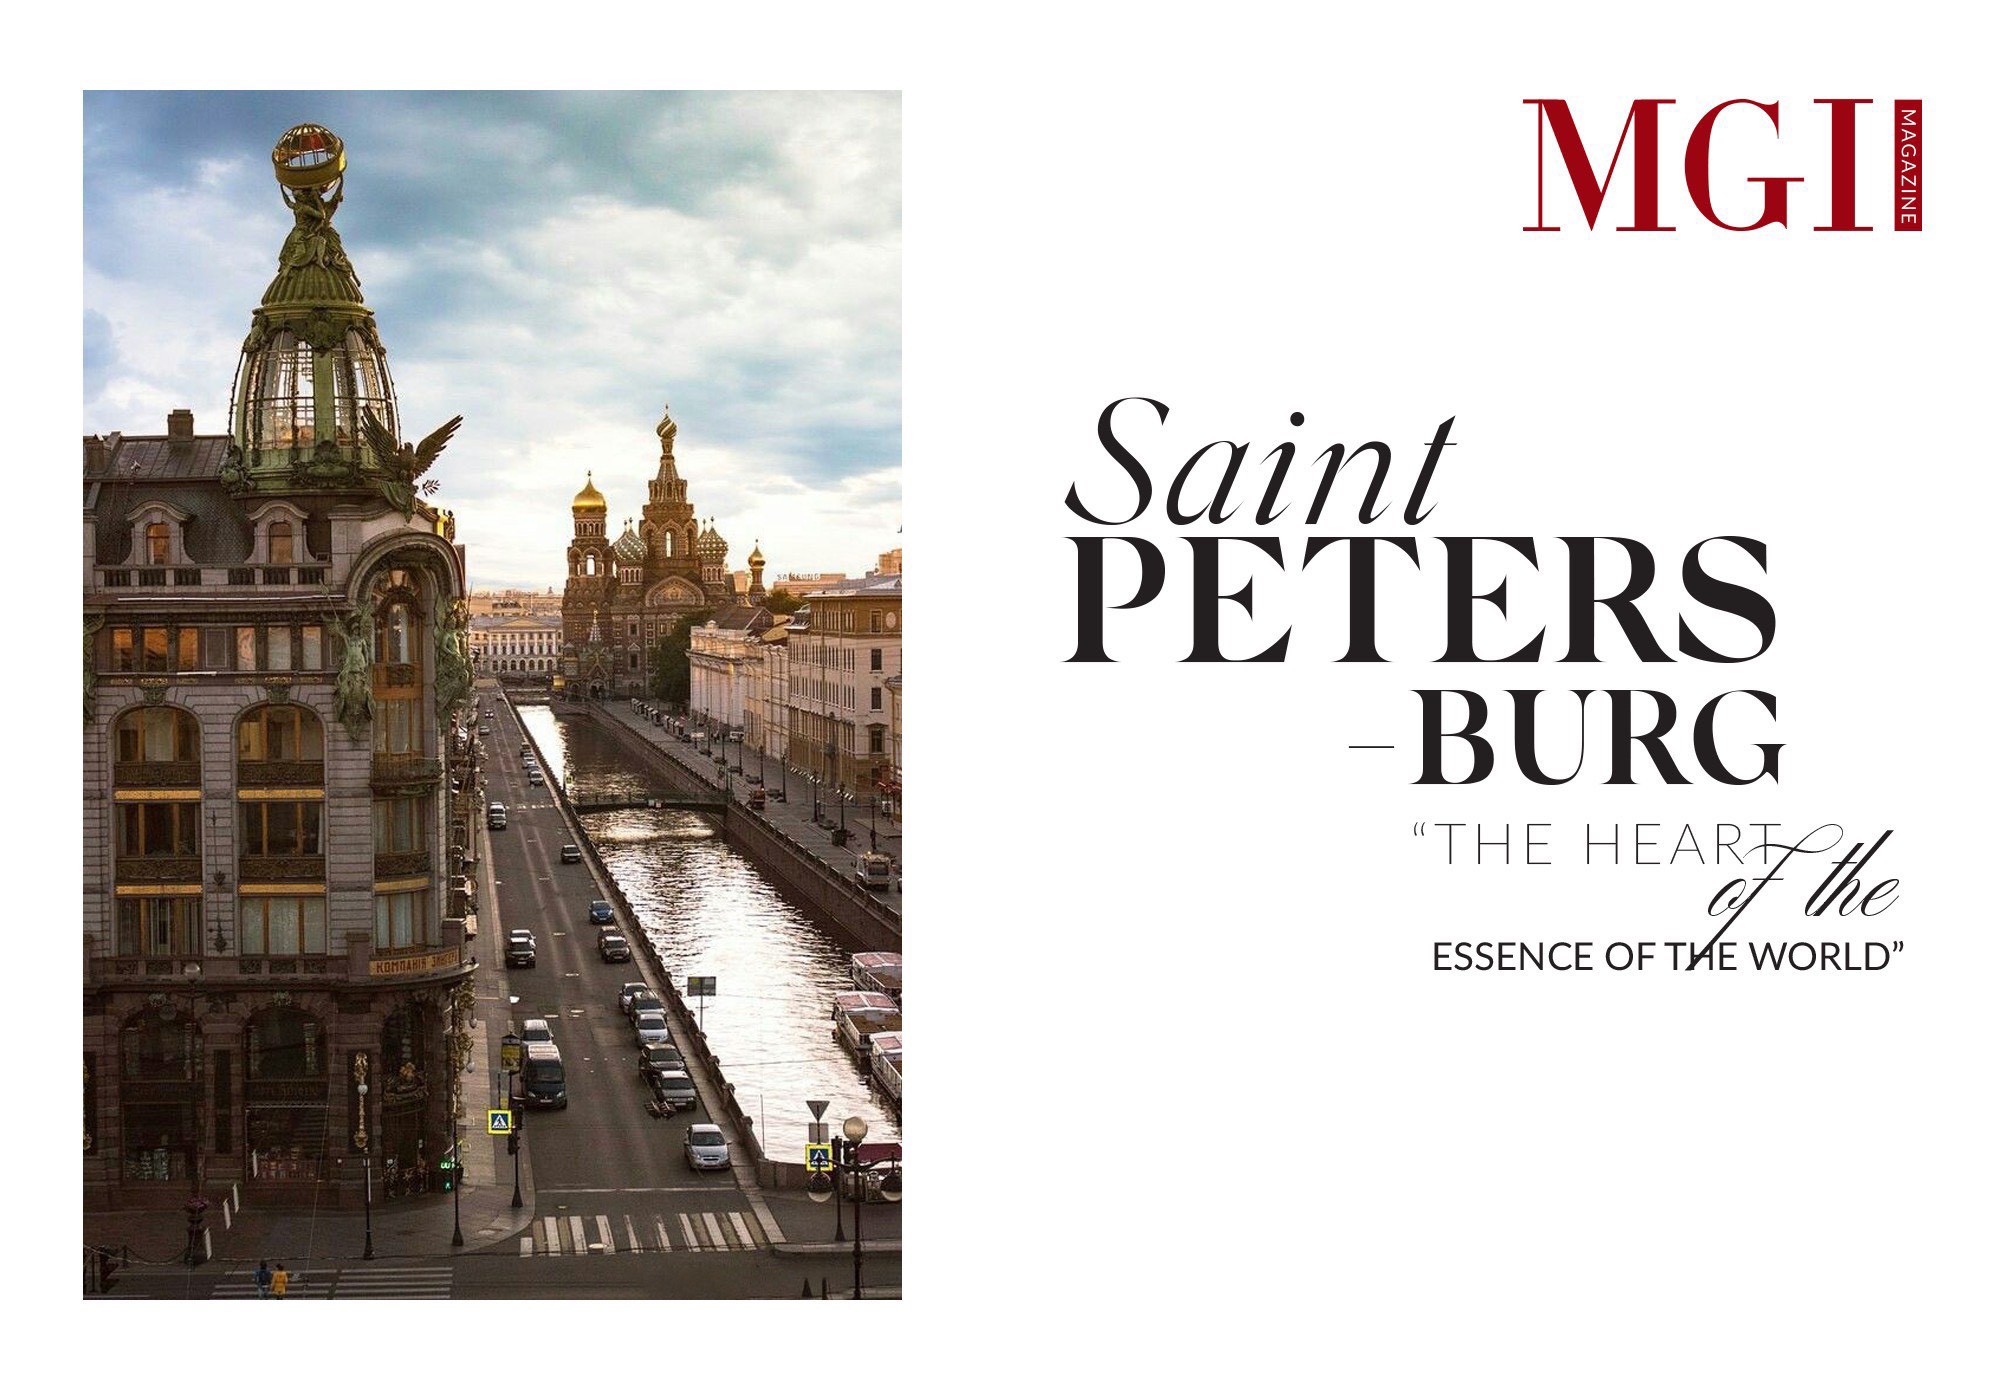 Saint Petersburg - “The heart of the essence of the world”